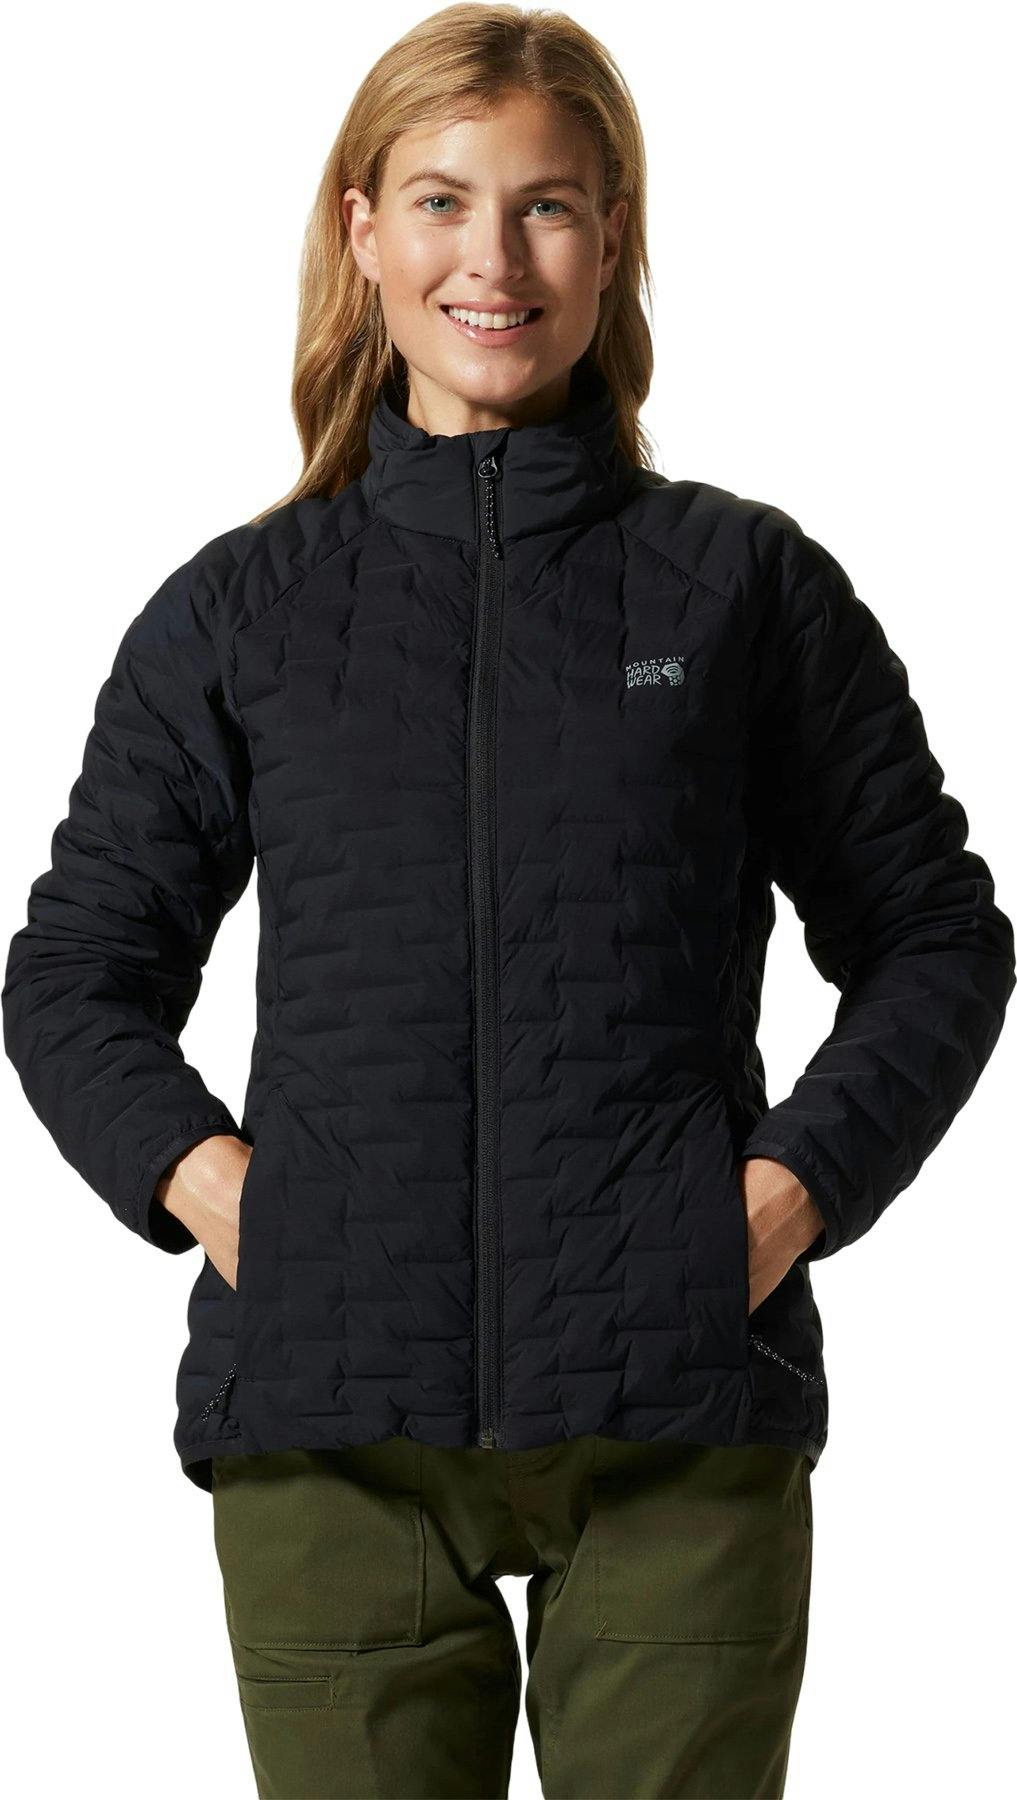 Product image for Stretchdown Light Jacket - Women's